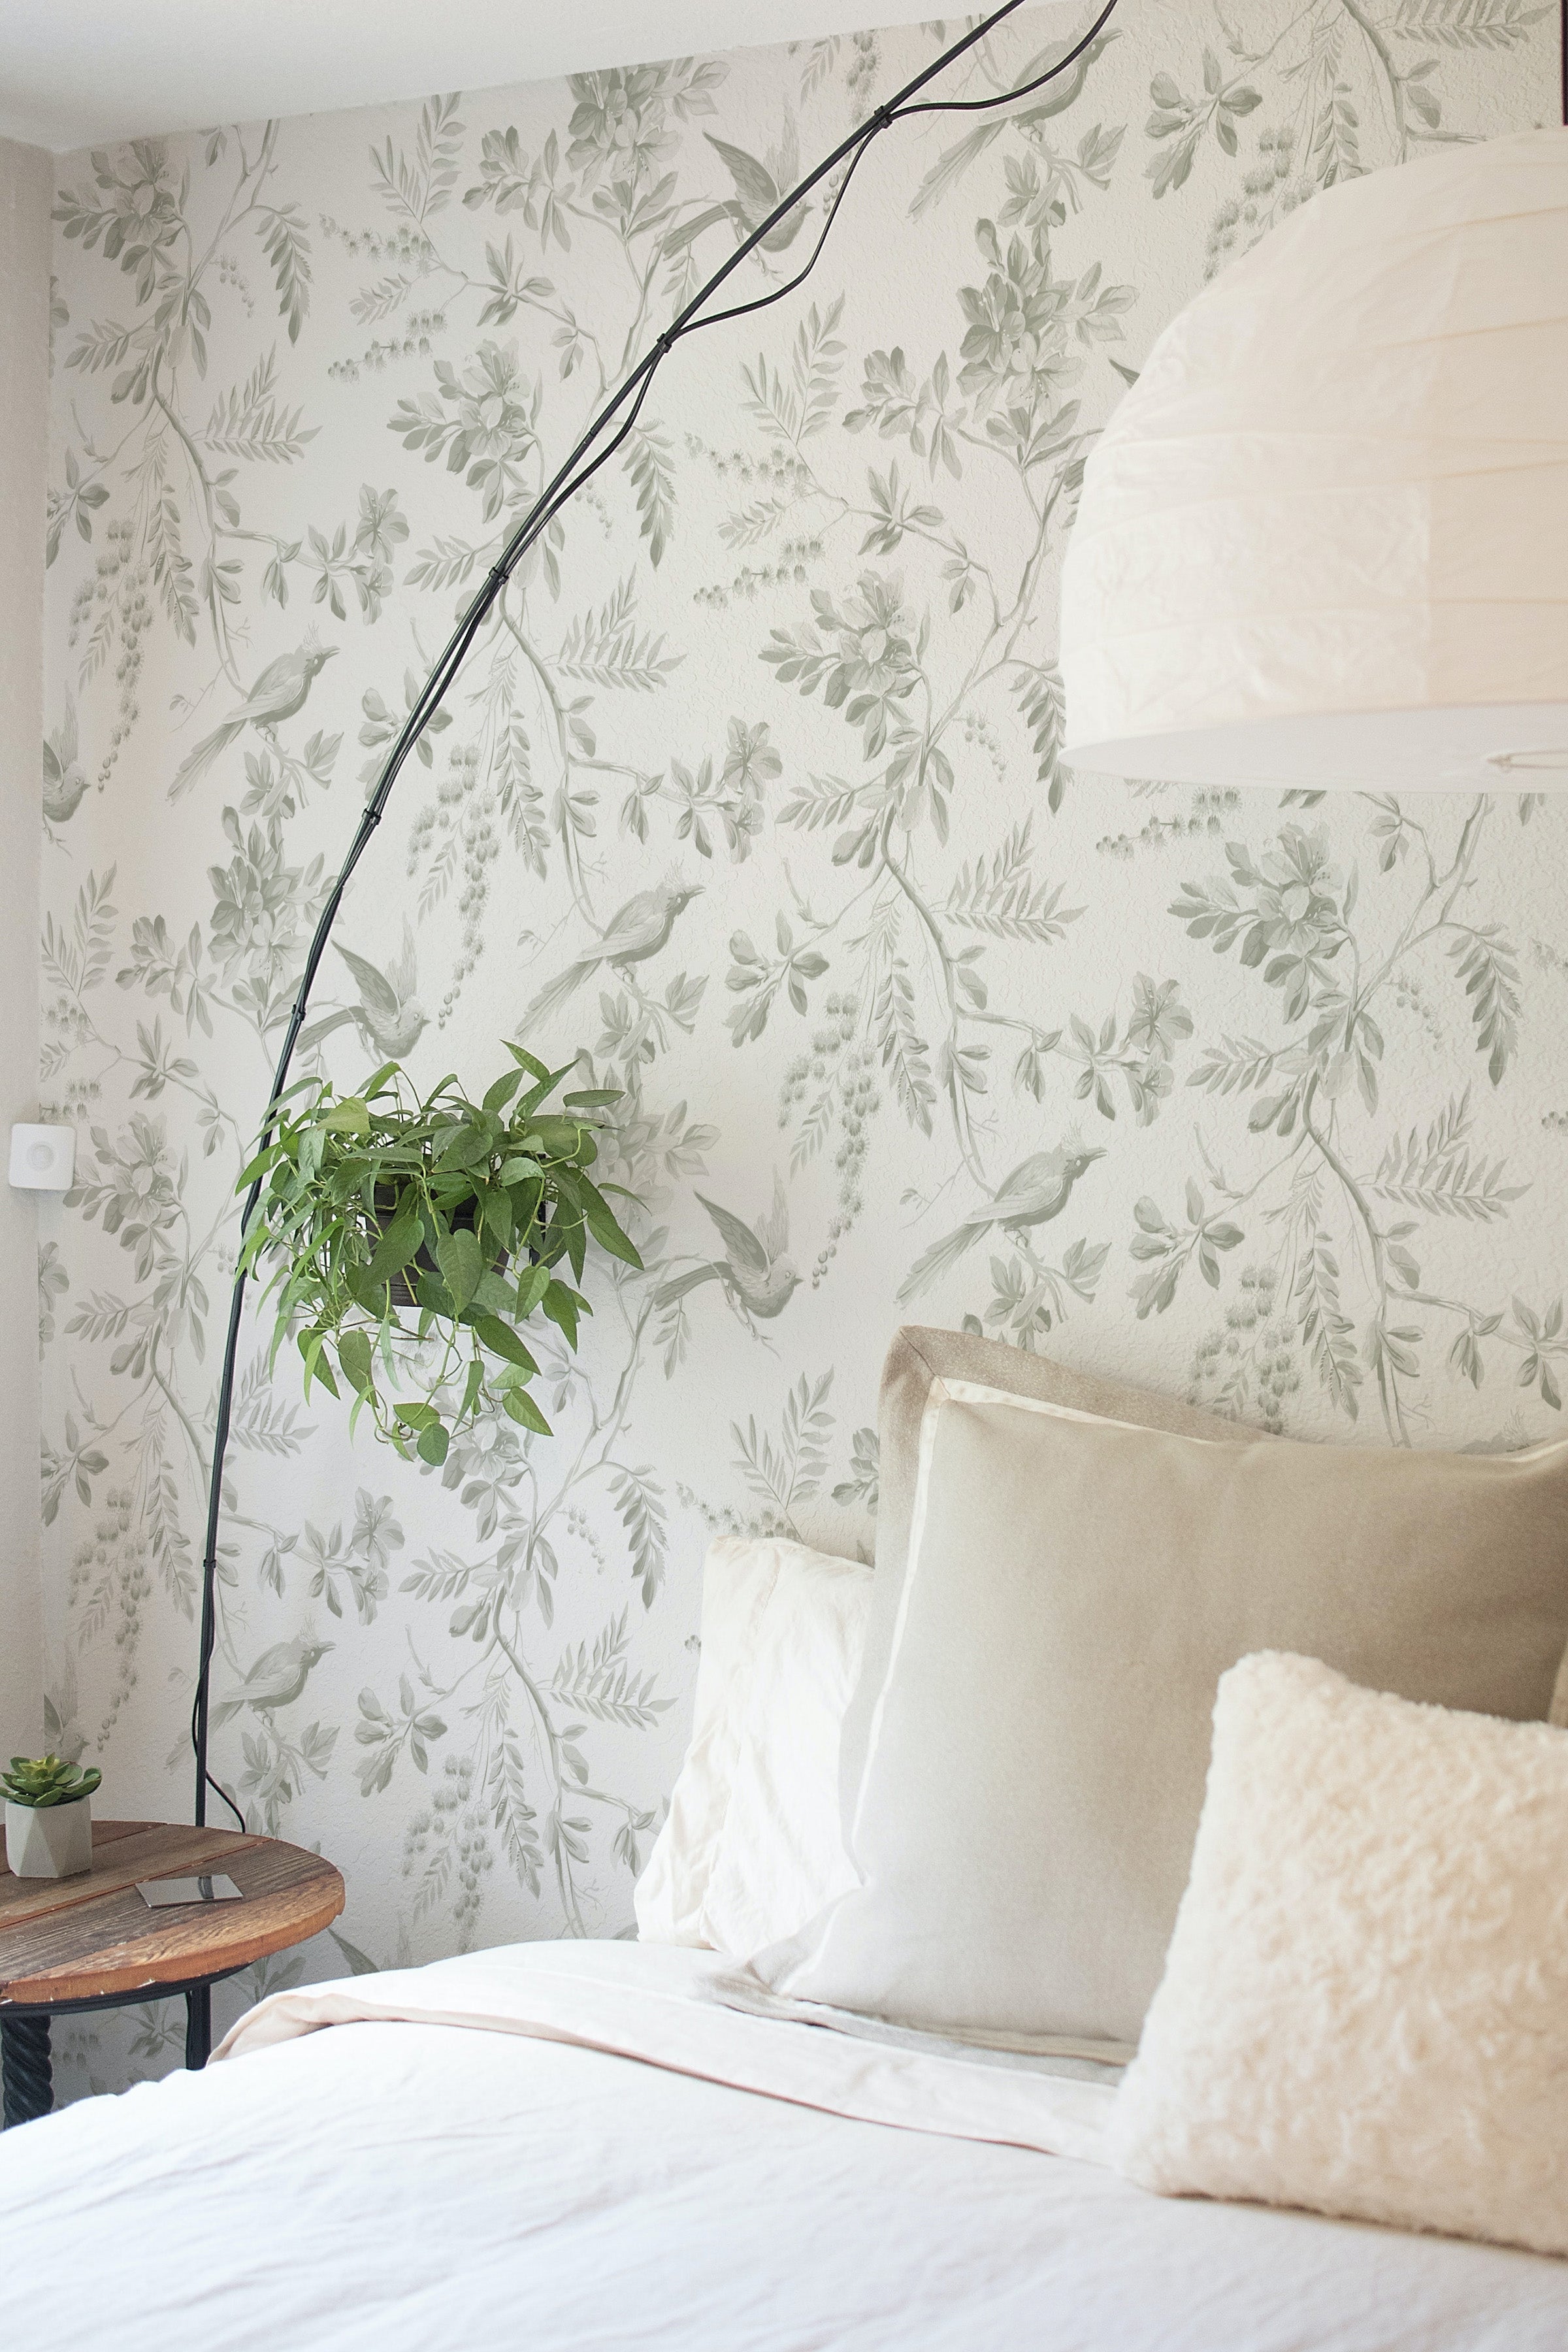 A bedroom scene with 'Blossoming Birds Wallpaper' creating a tranquil ambience, accented by an overhanging plant and a bed dressed in neutral linens, evoking a sense of being in a serene, bird-filled garden